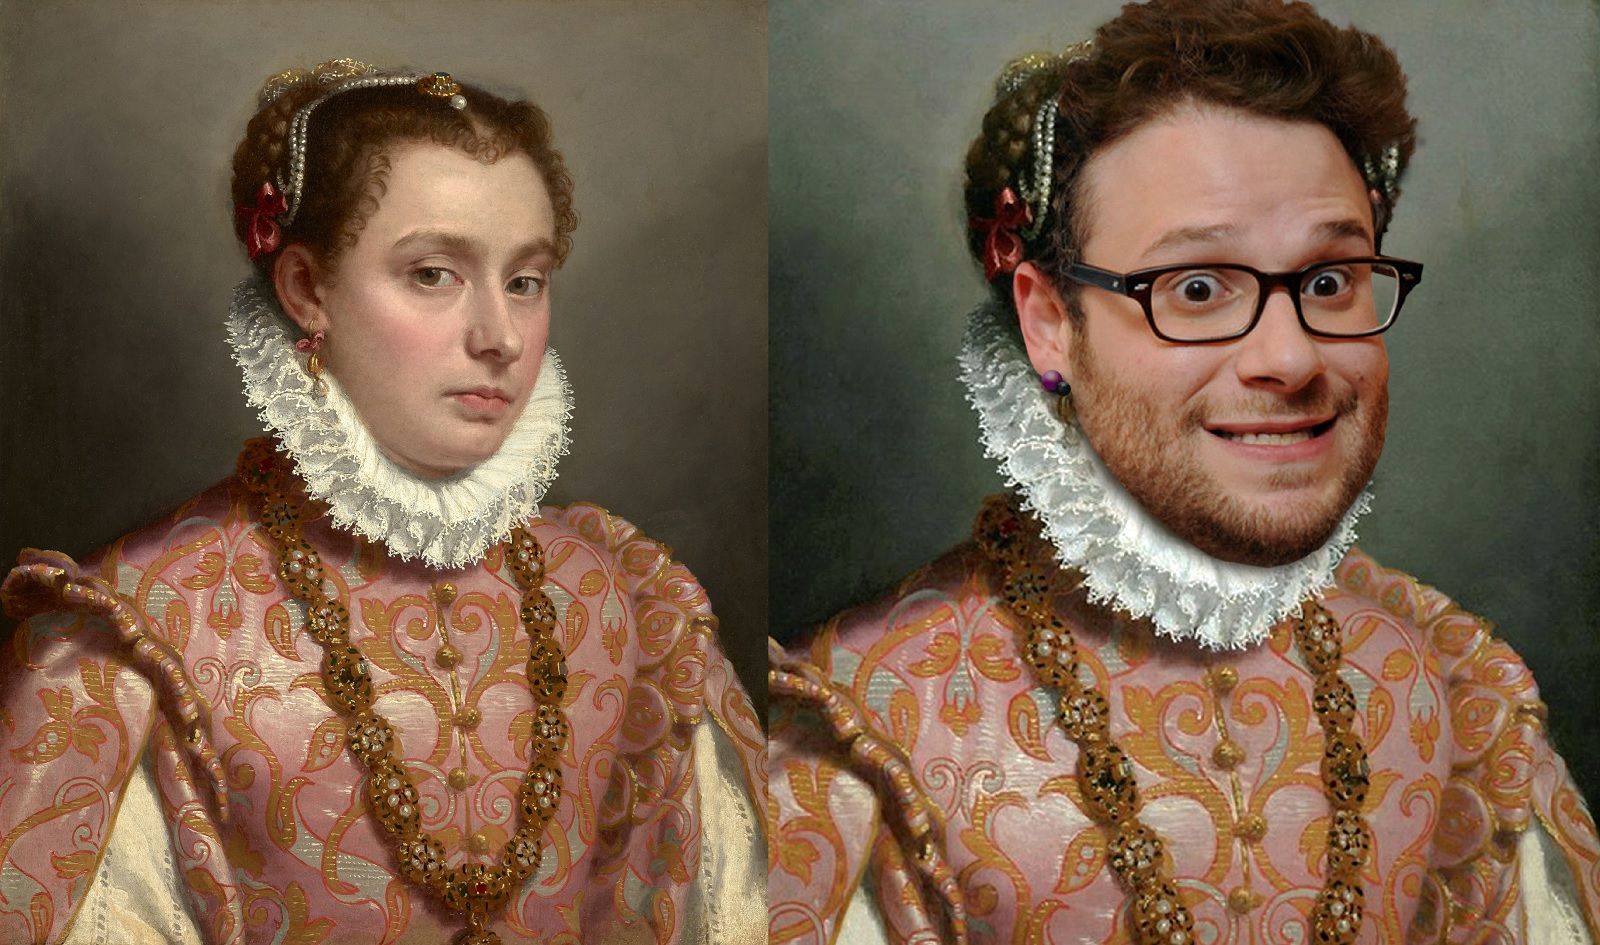 Hilarious Images Of Celebrities Photoshopped Into Renaissance Paintings image 9